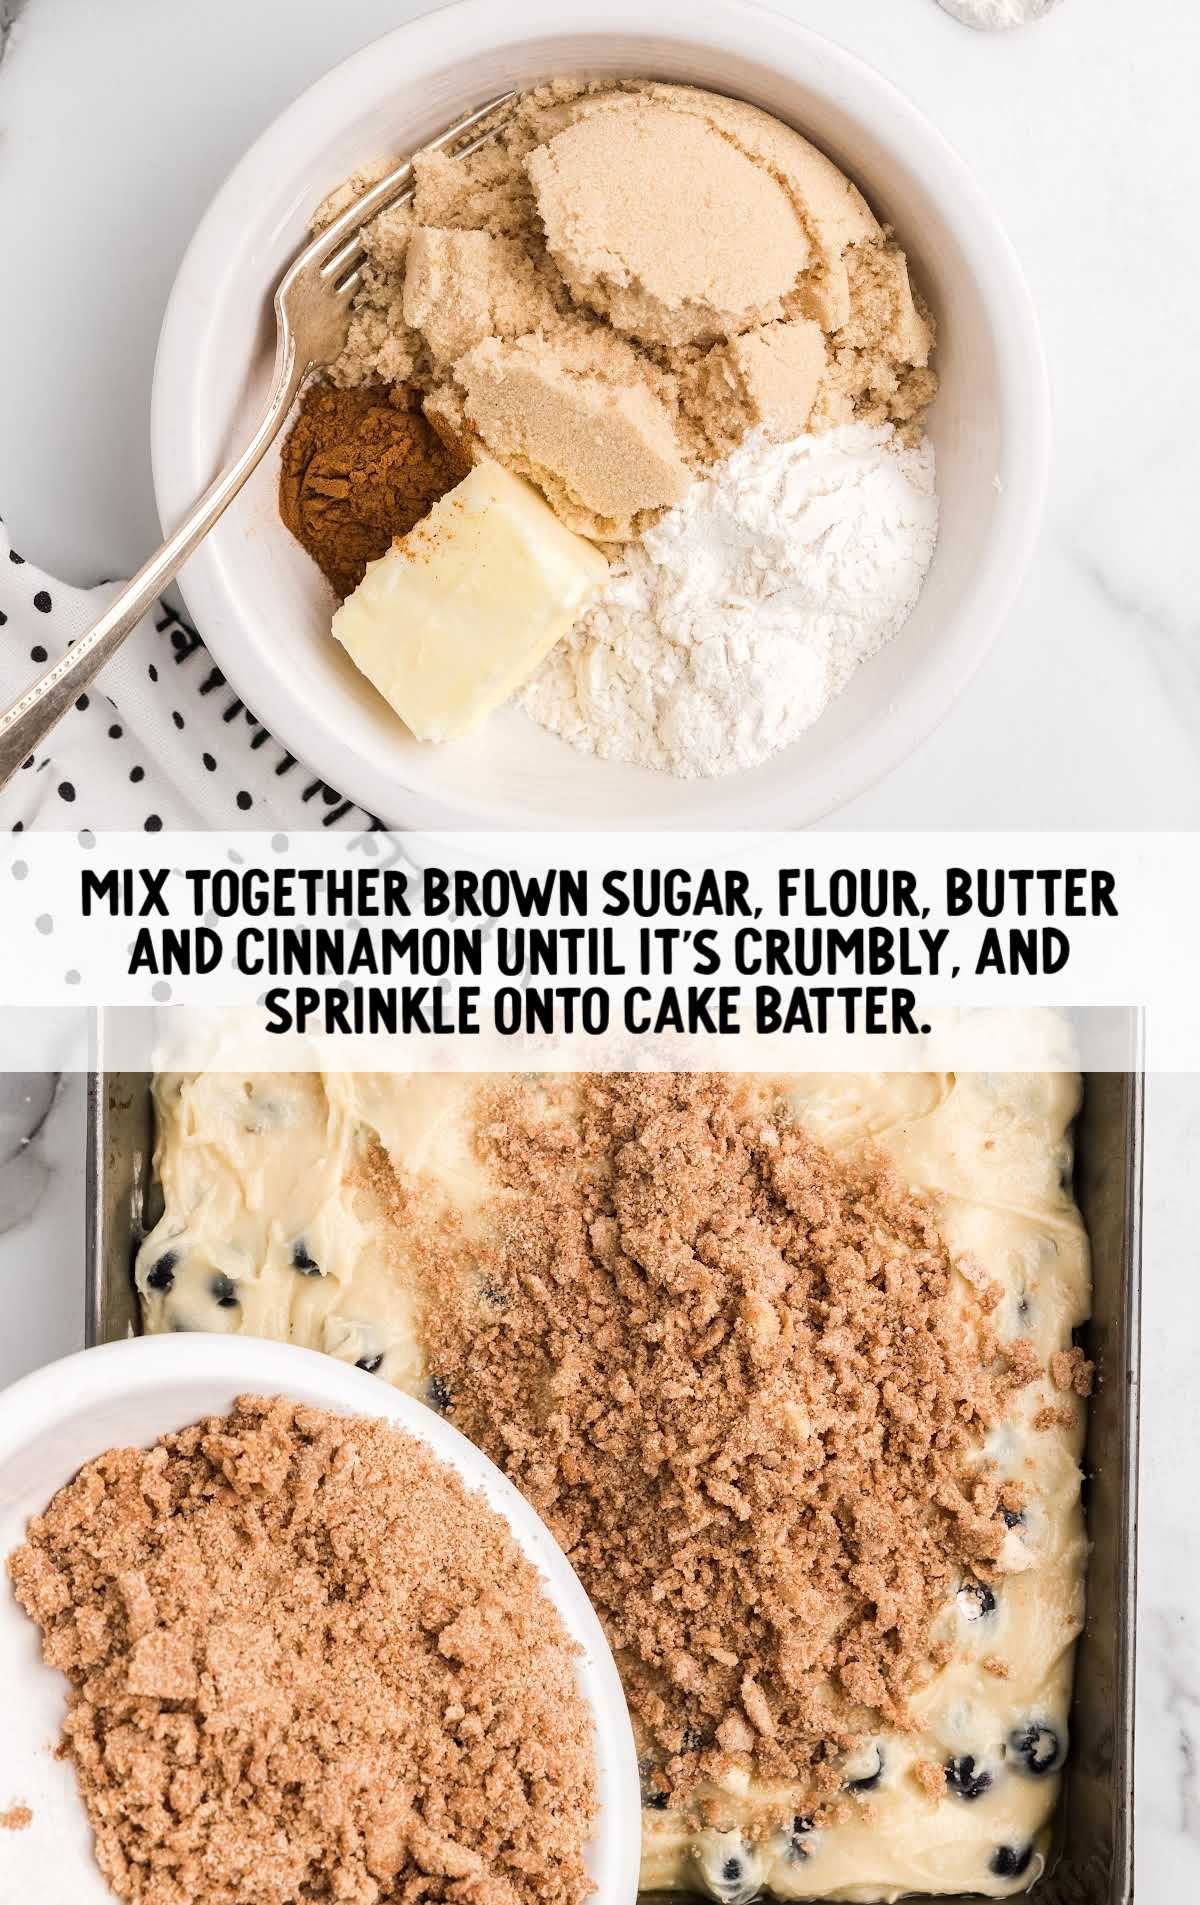 brown sugar, flour, butter, and cinnamon combined in a bowl then poured on top of the cake batter in the baking dish